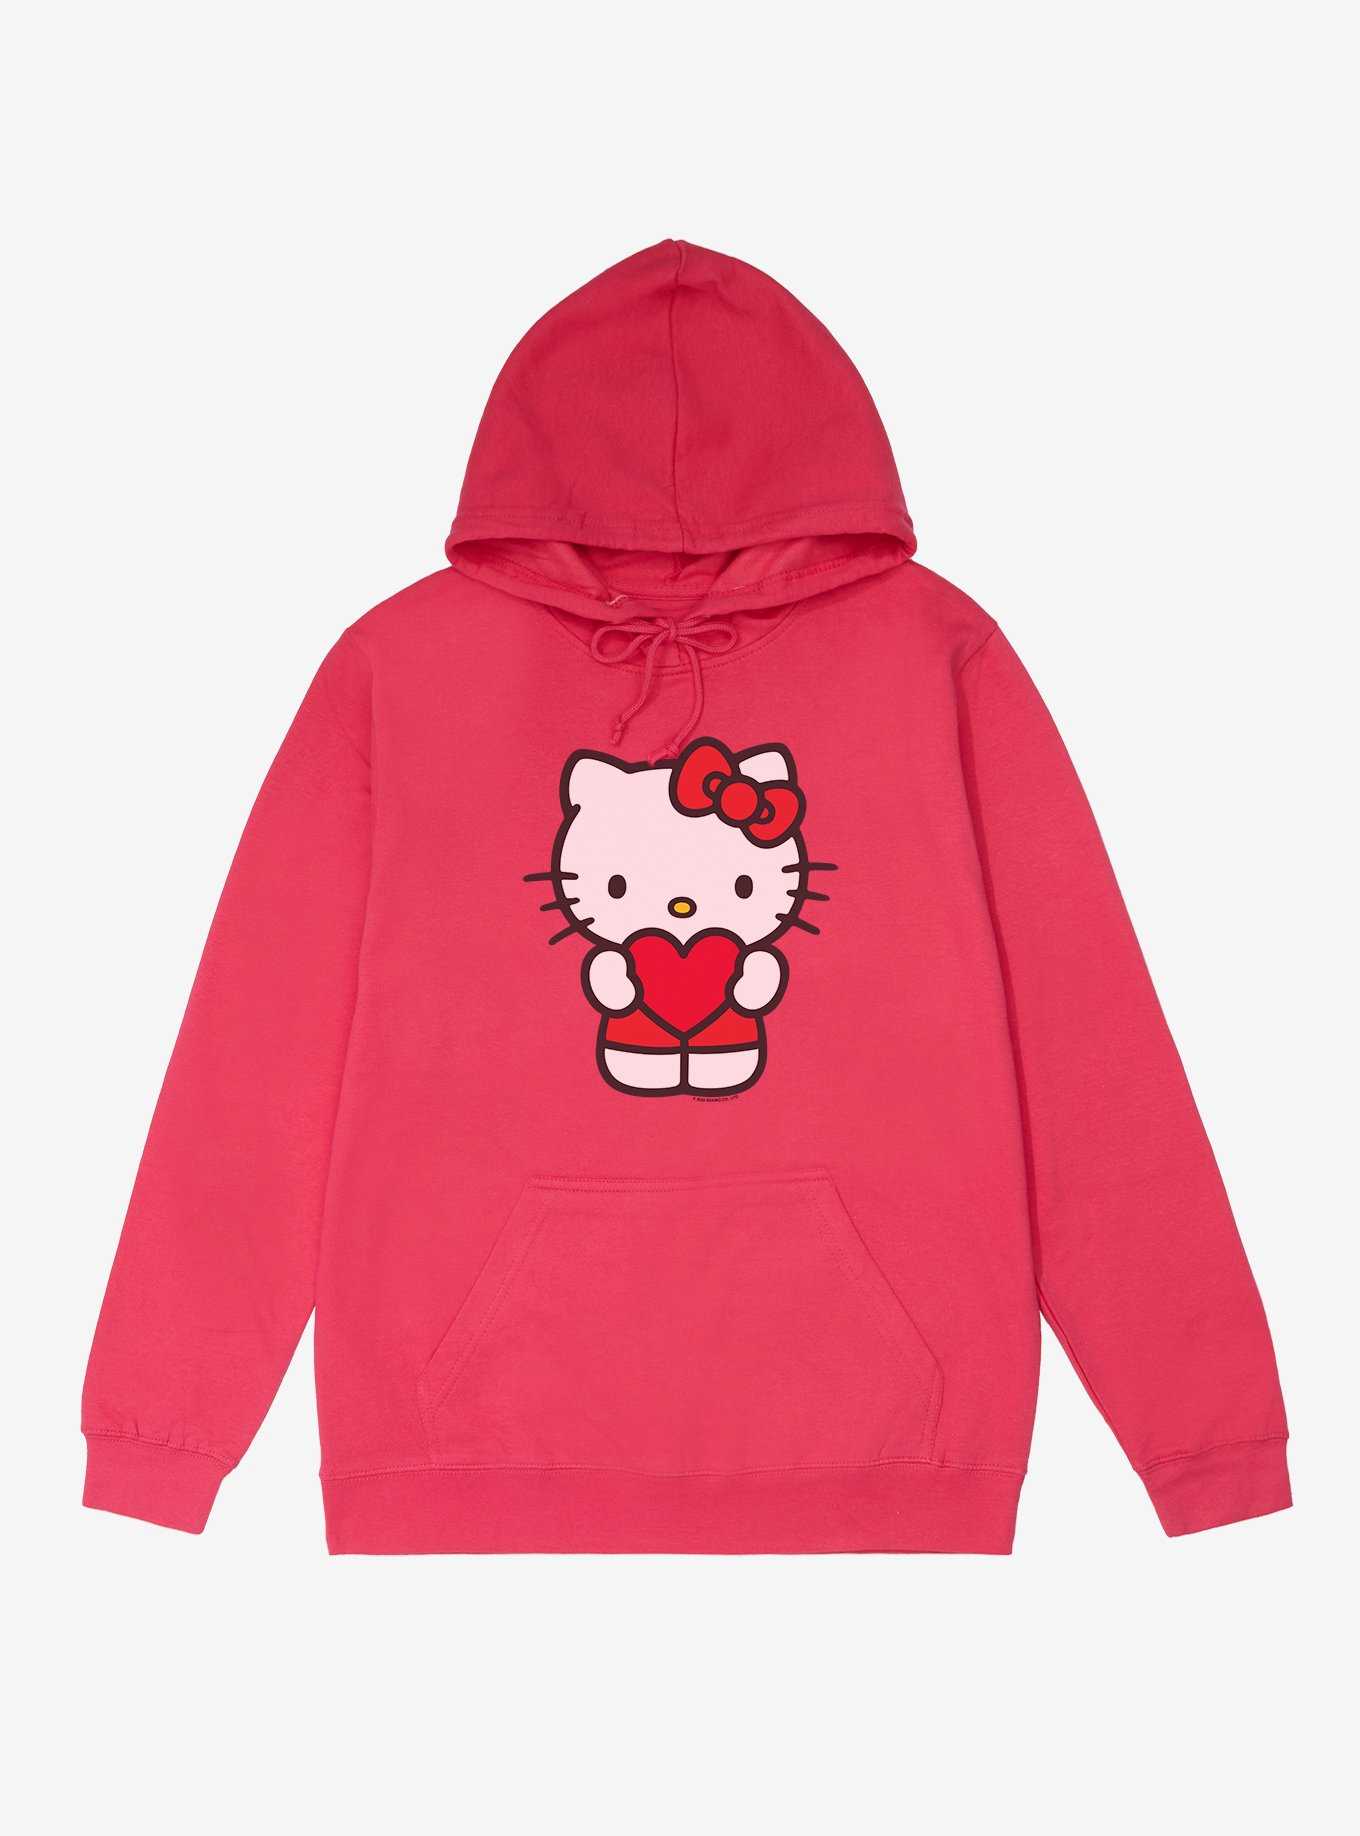 Hello Kitty  Holding A Heart French Terry Hoodie, , hi-res